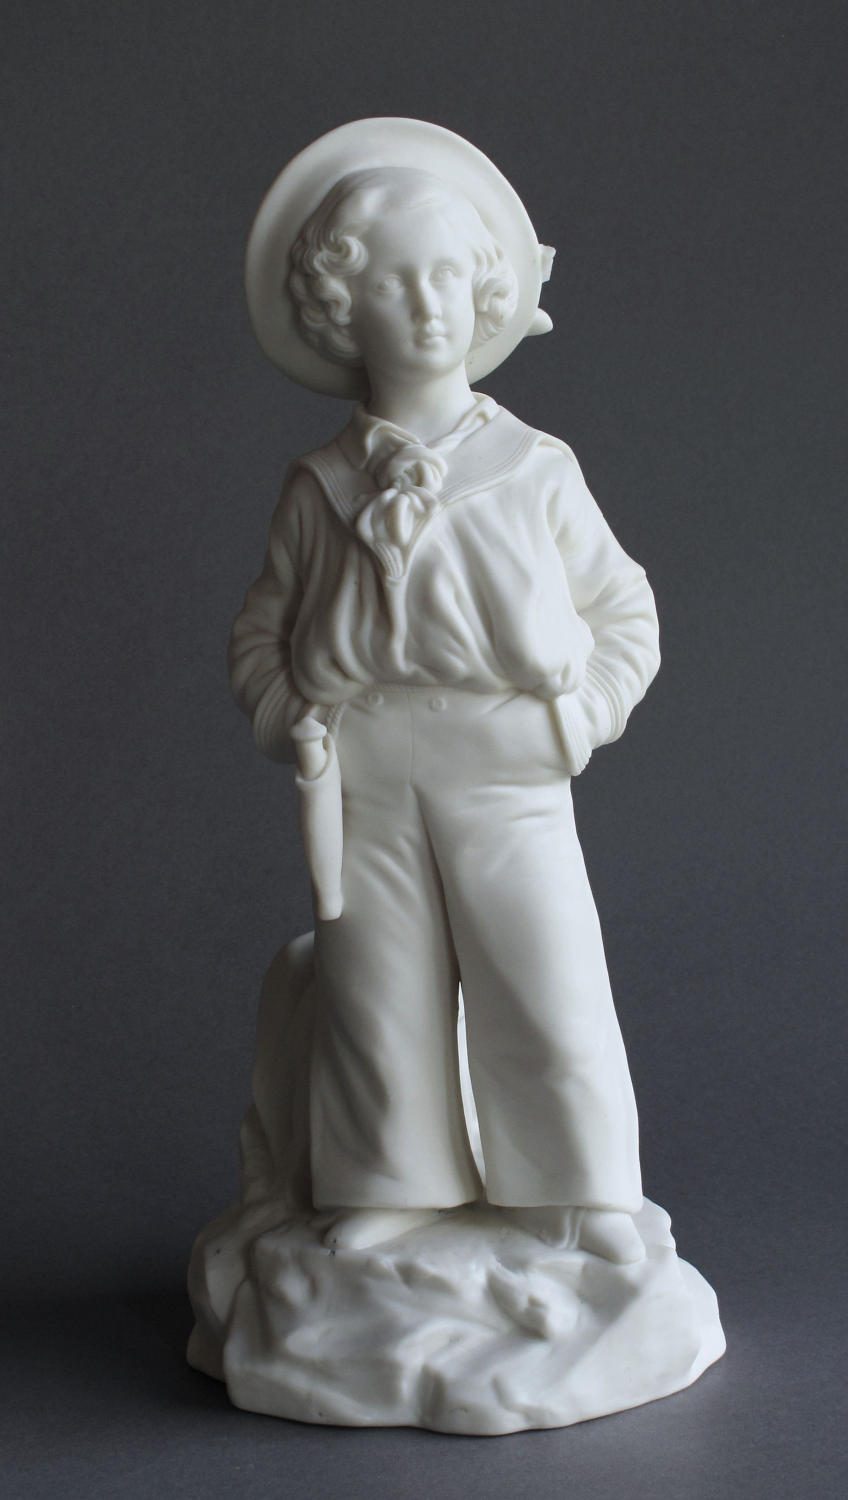 A charming Minton Parian figure of Prince Albert Edward as a child